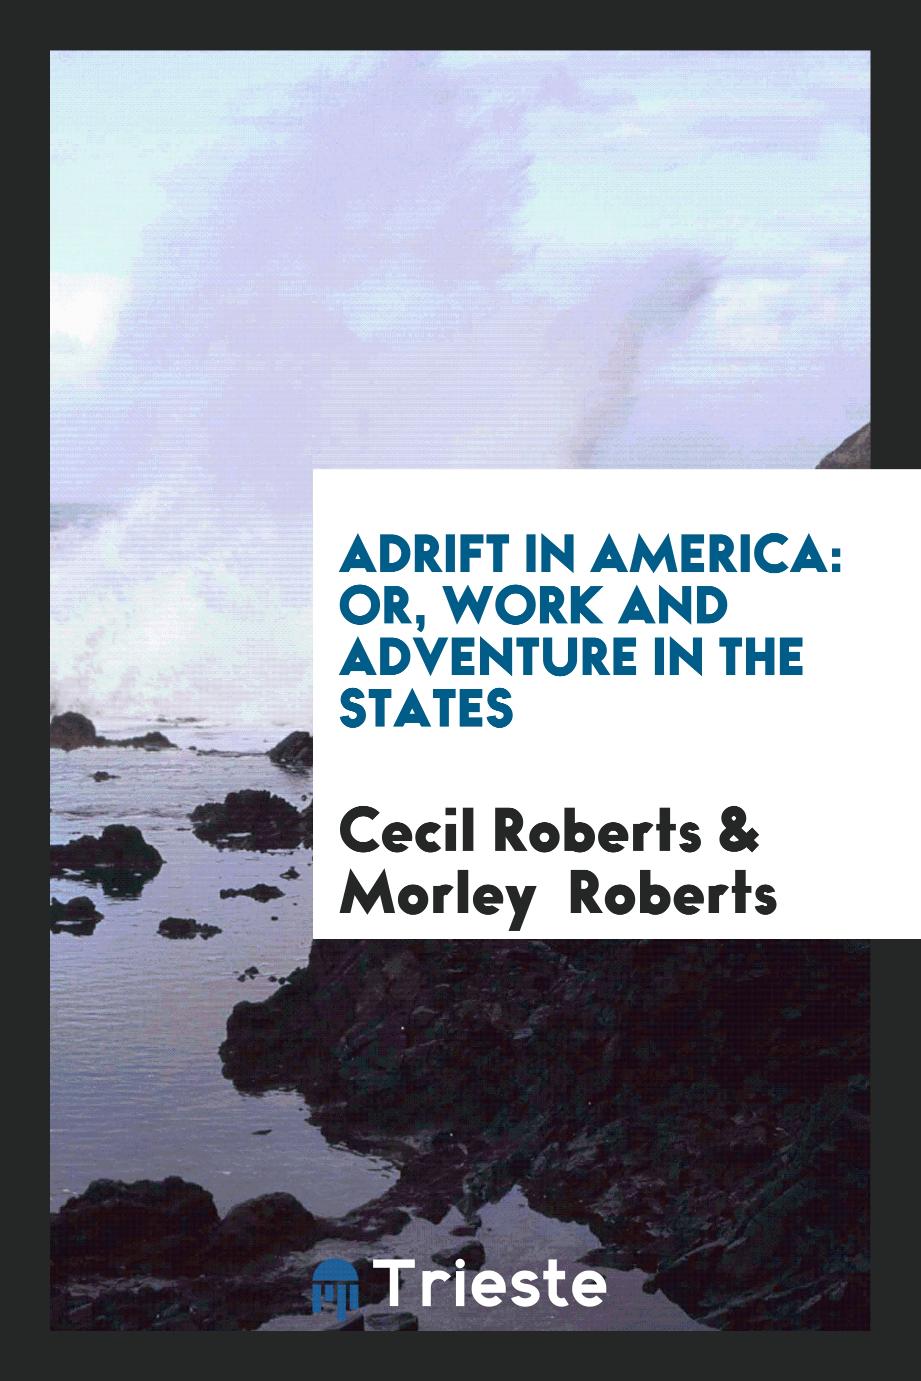 Adrift in America: Or, Work and Adventure in the States